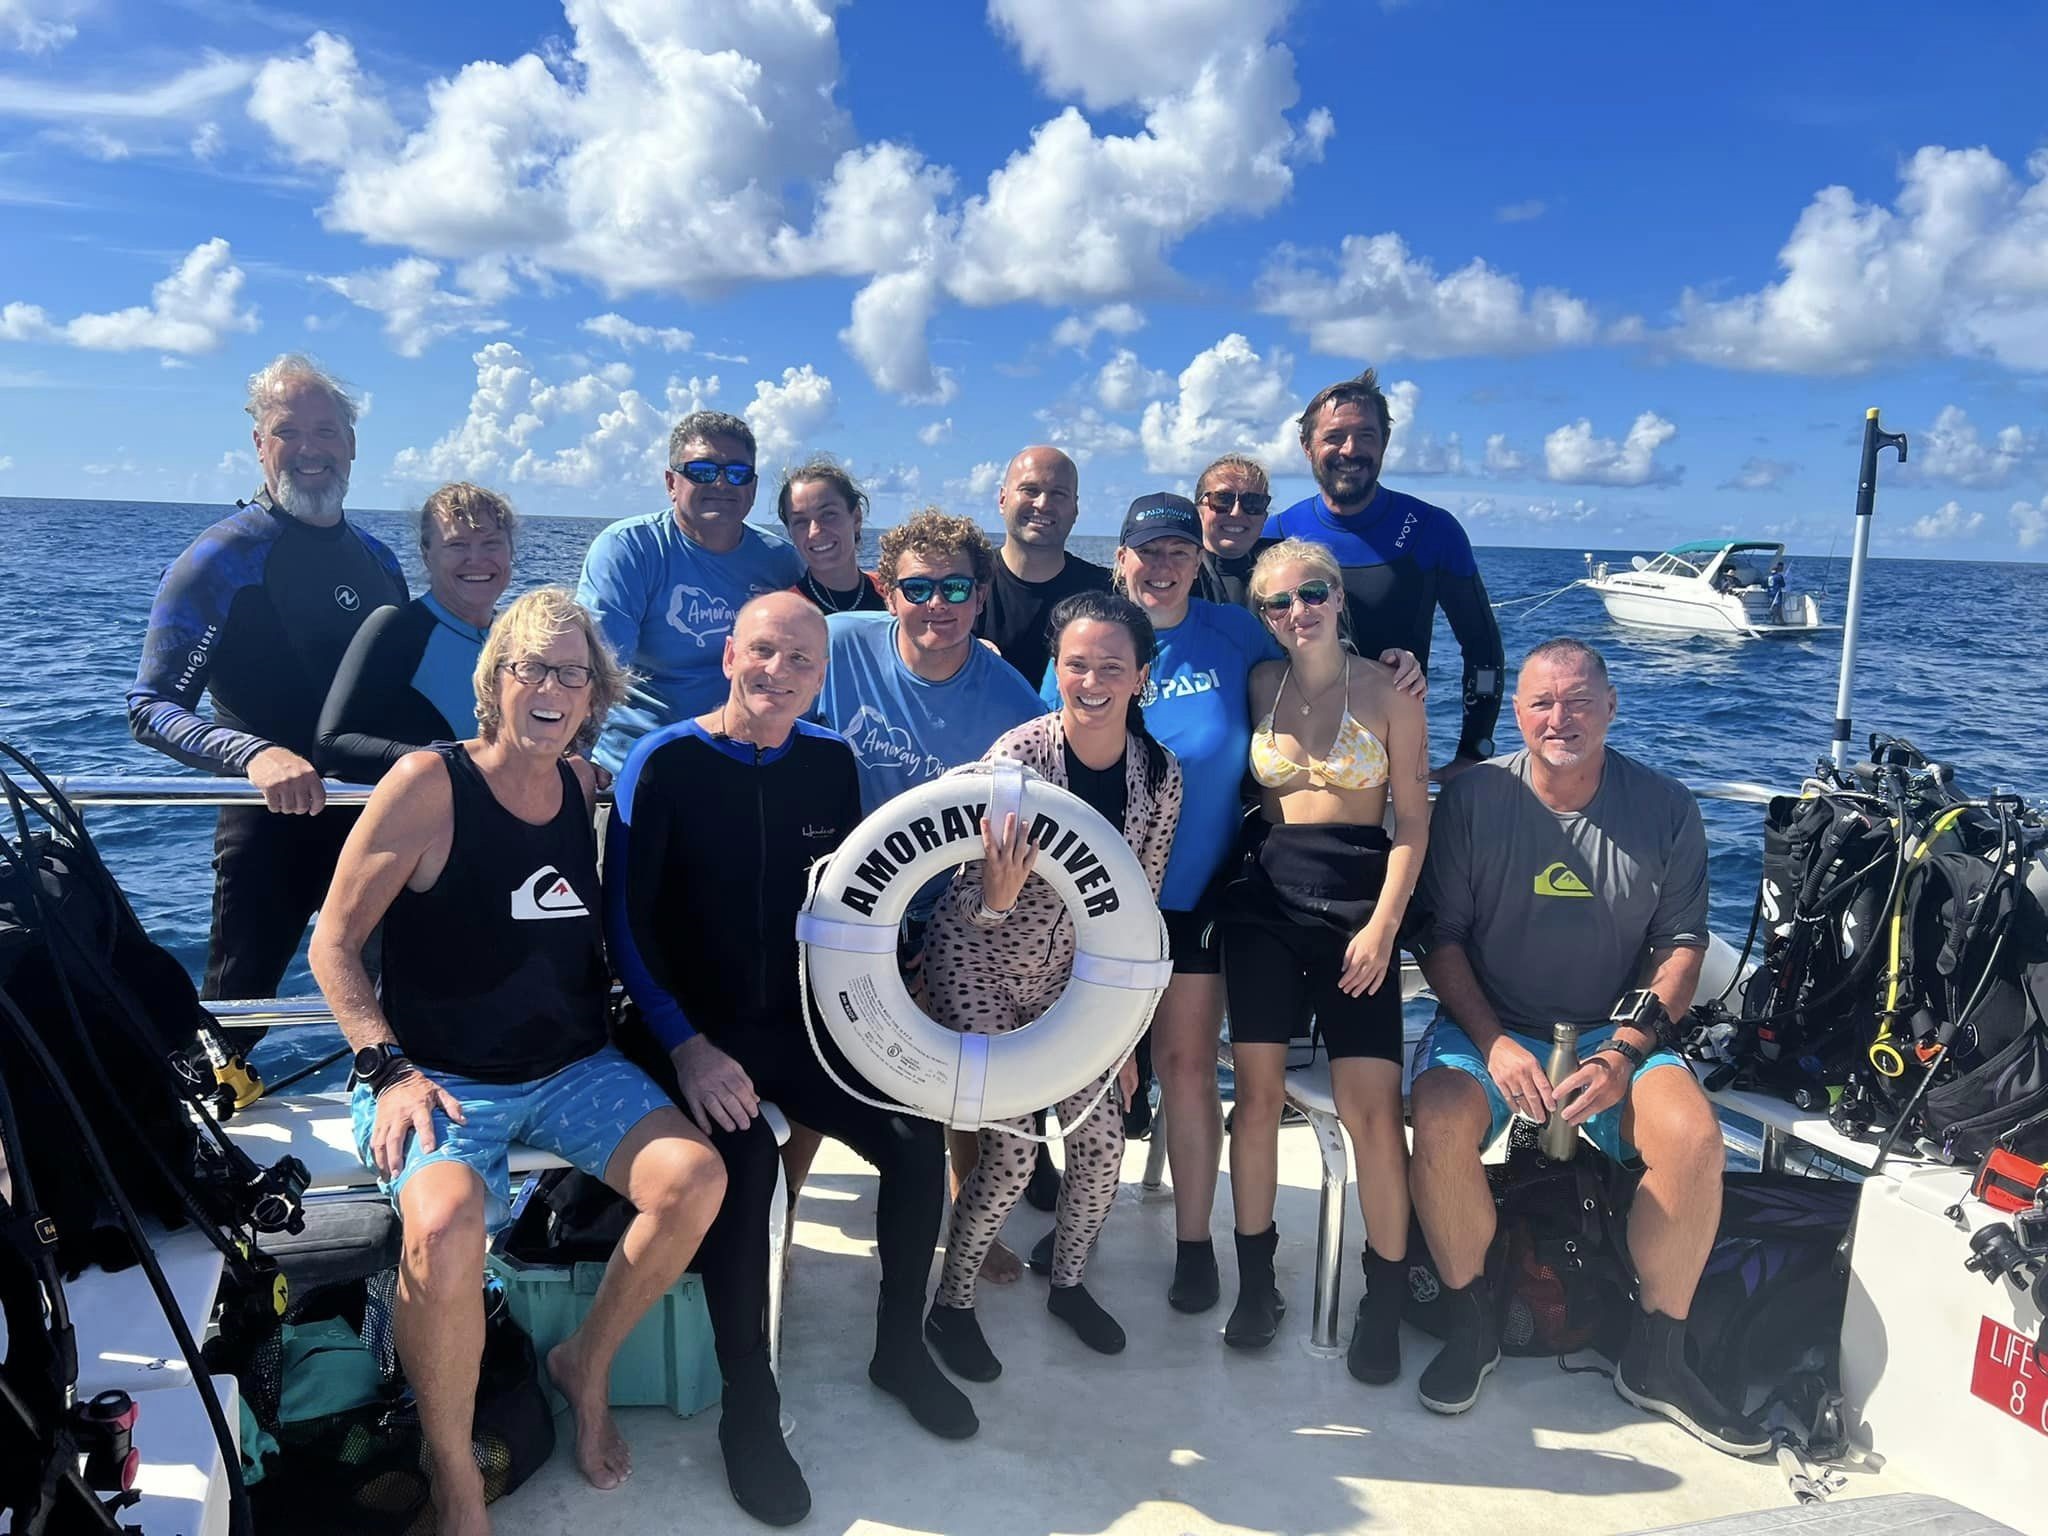 A group of 13 smiling scuba divers on a boat posing with a white life ring with the ocean in the background